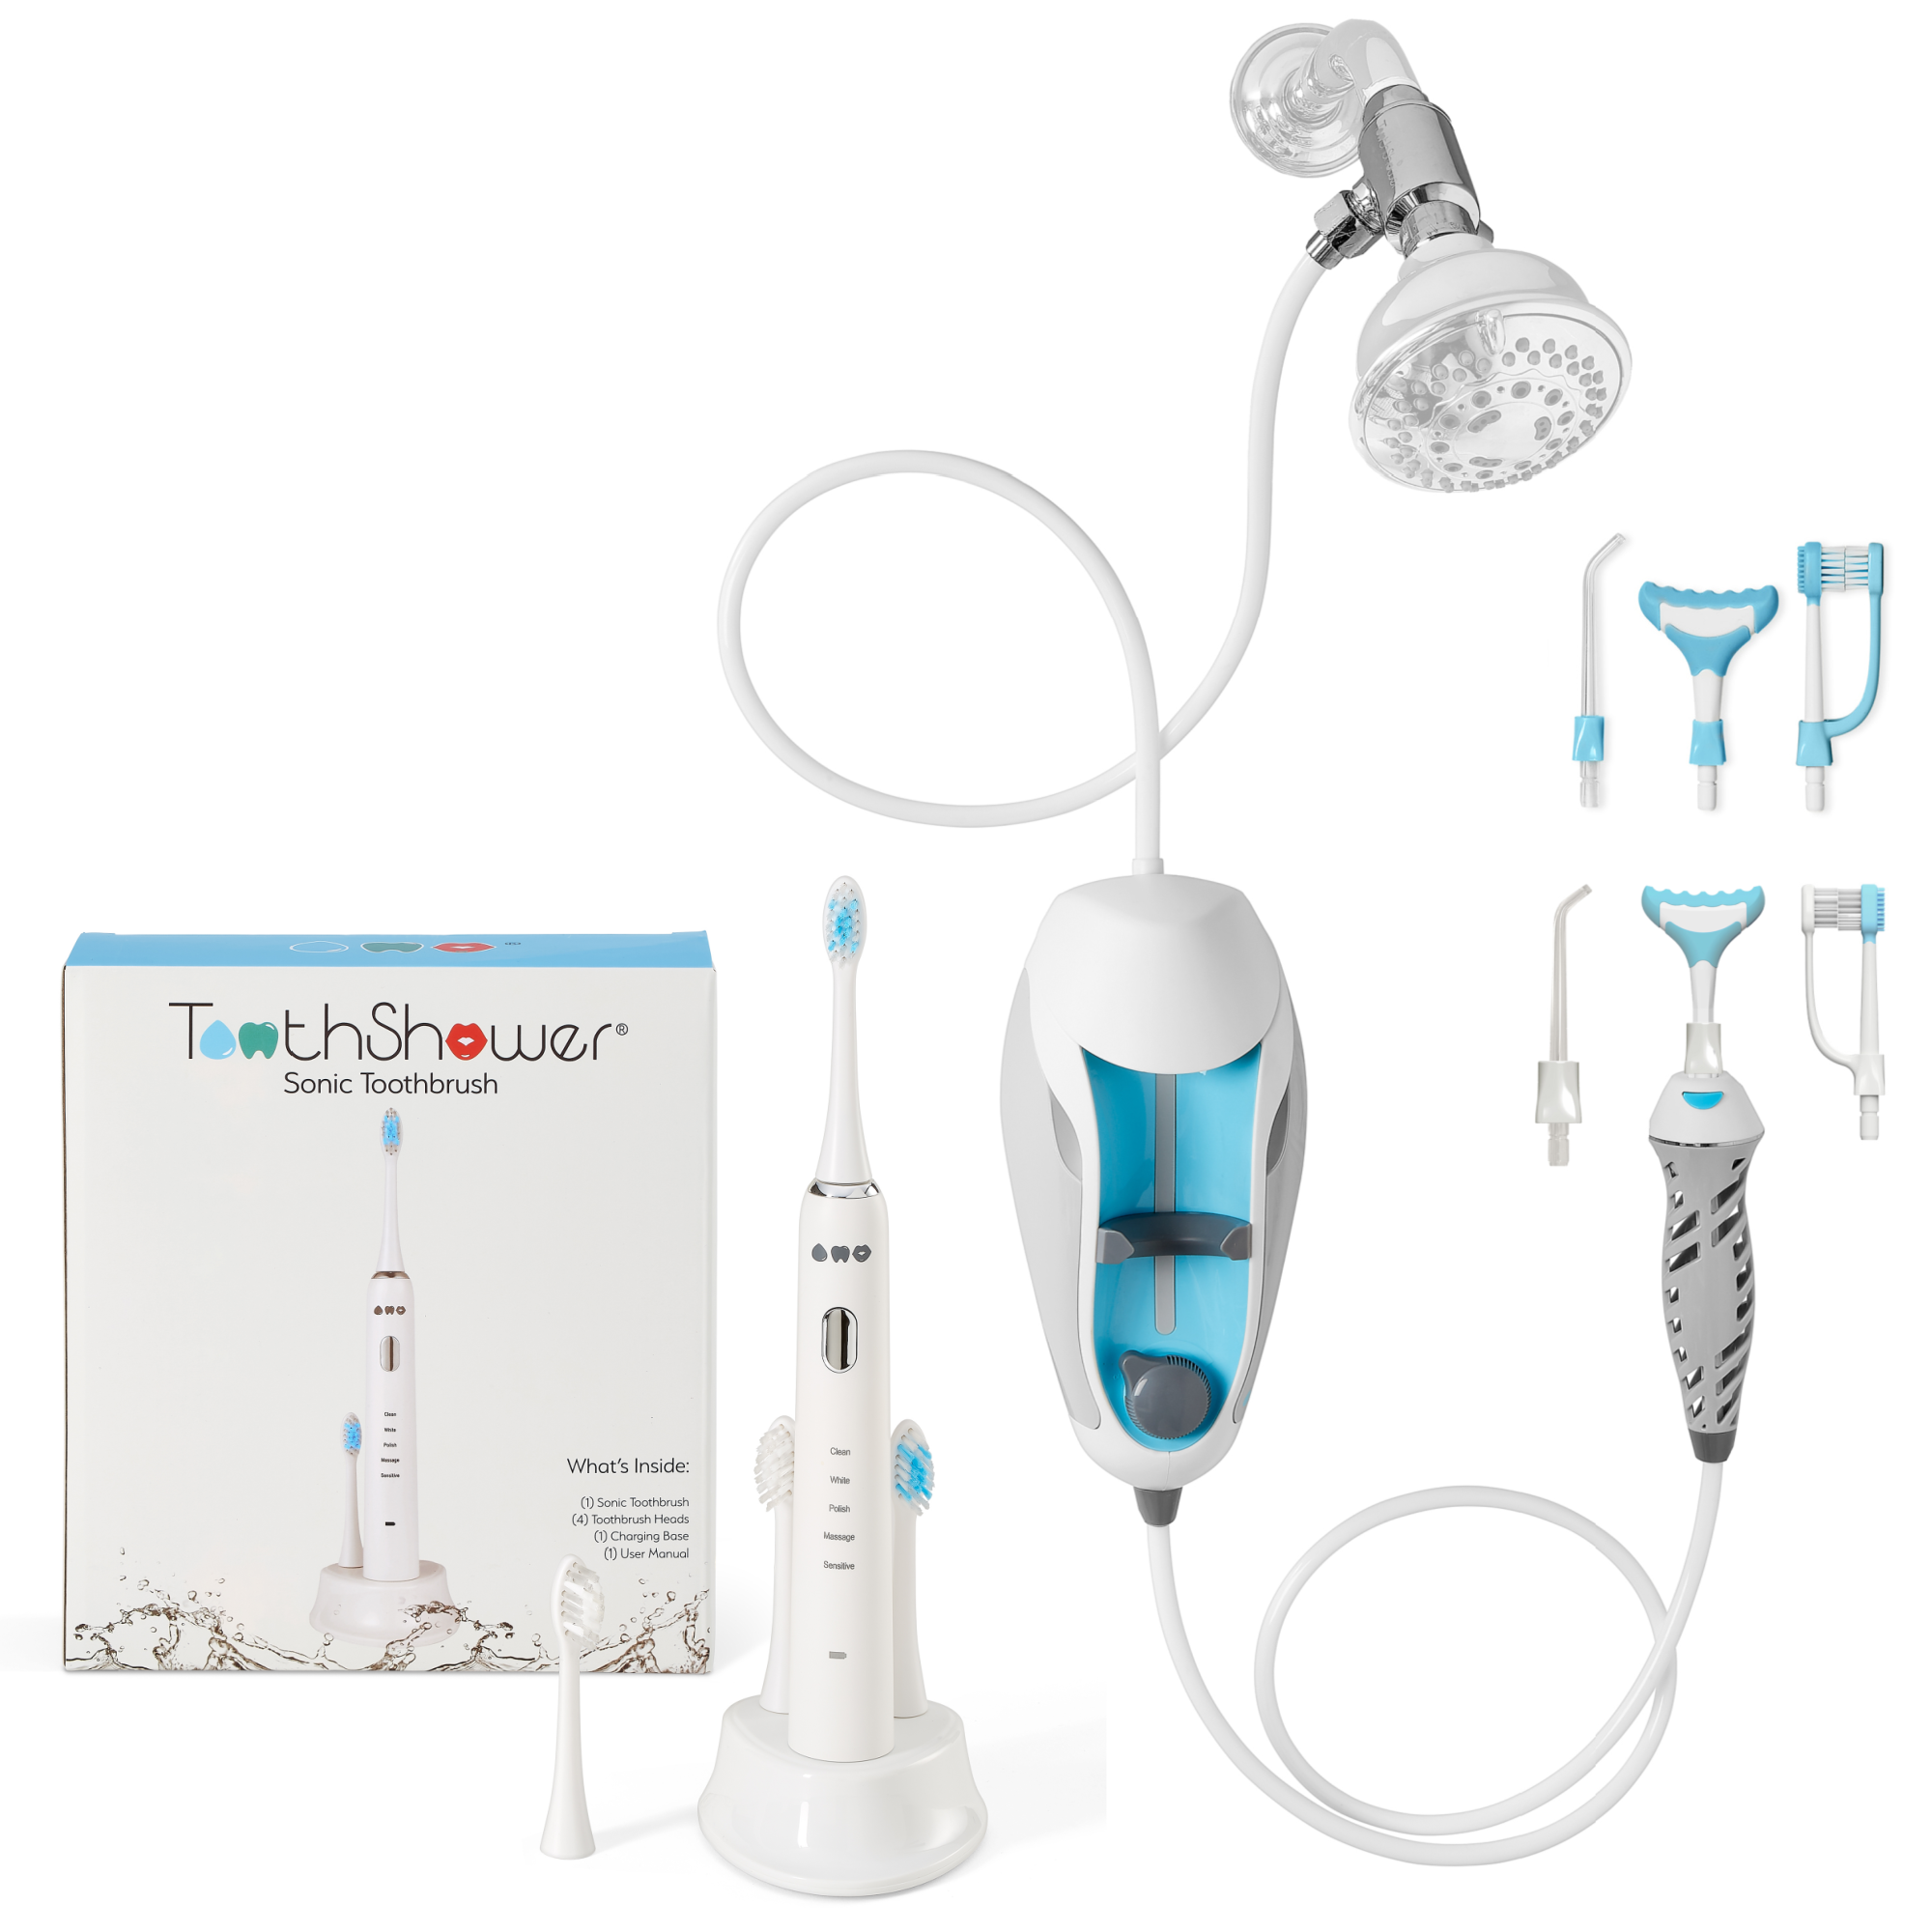 toothshower water flosser plus sonic toothbrush for two users, couples units, cleaner mouths